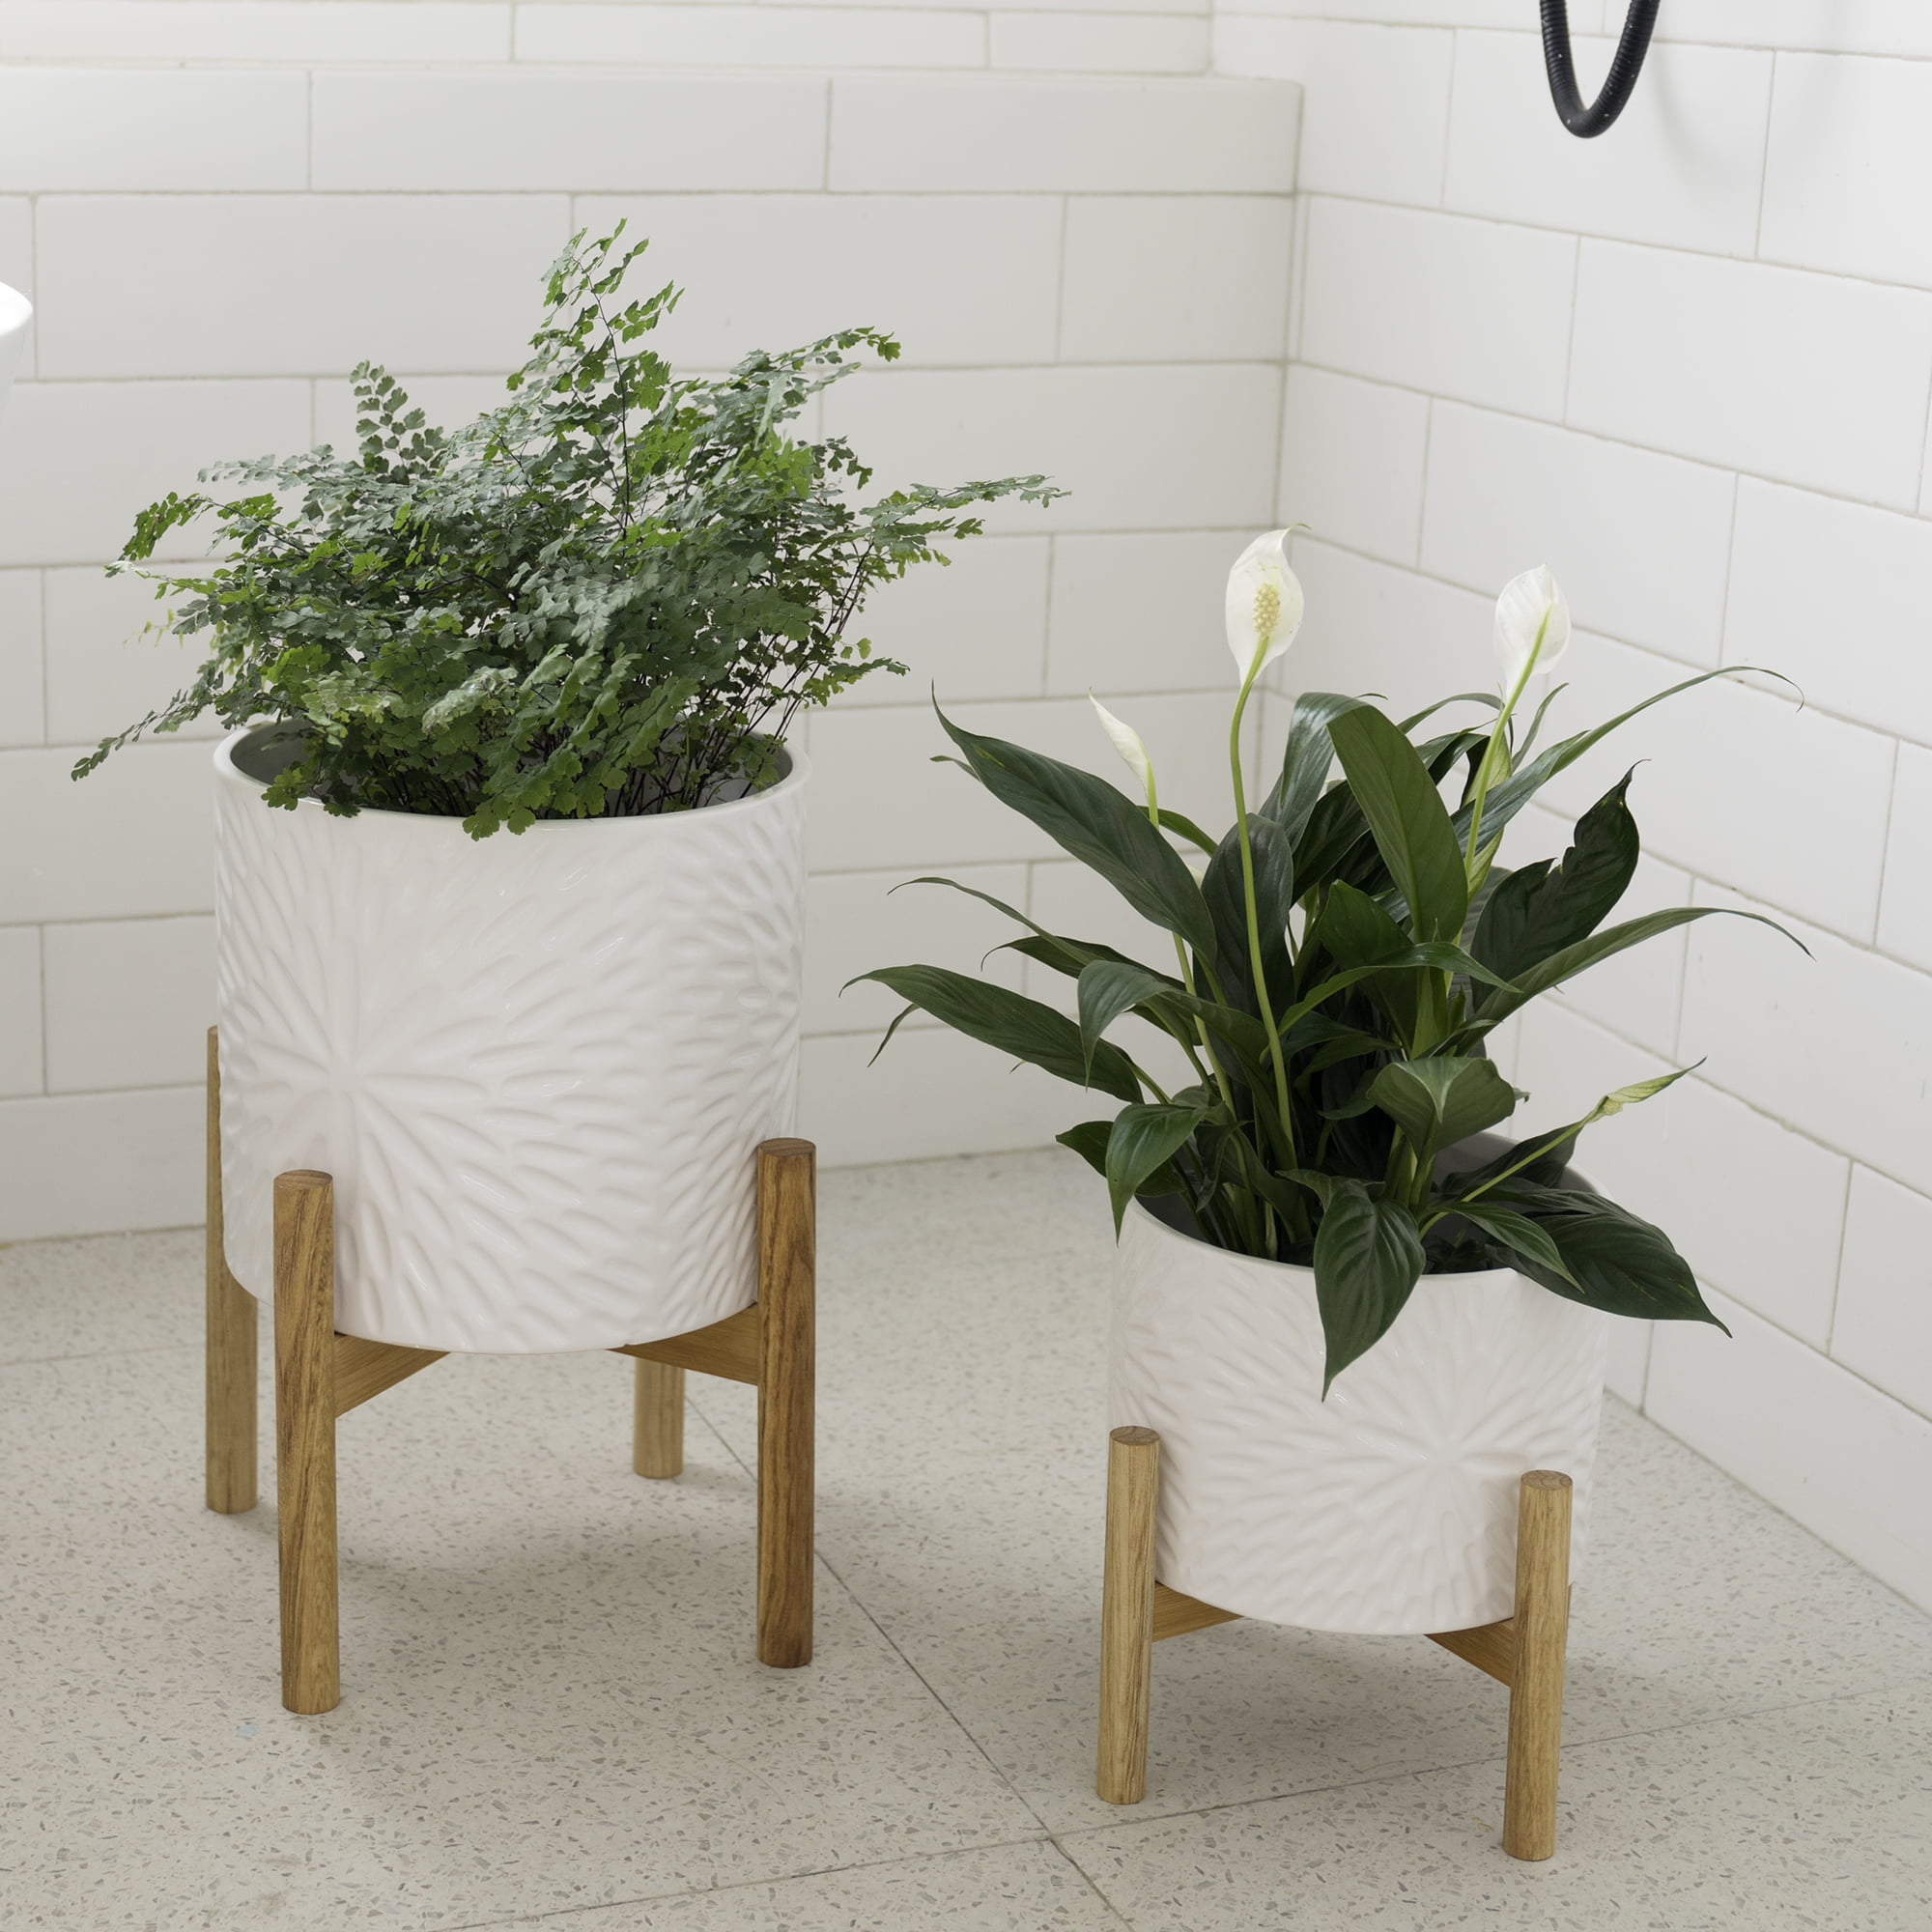 La Jolie Muse Ceramic Plant Pot with Wood Stand - 8 Inch White